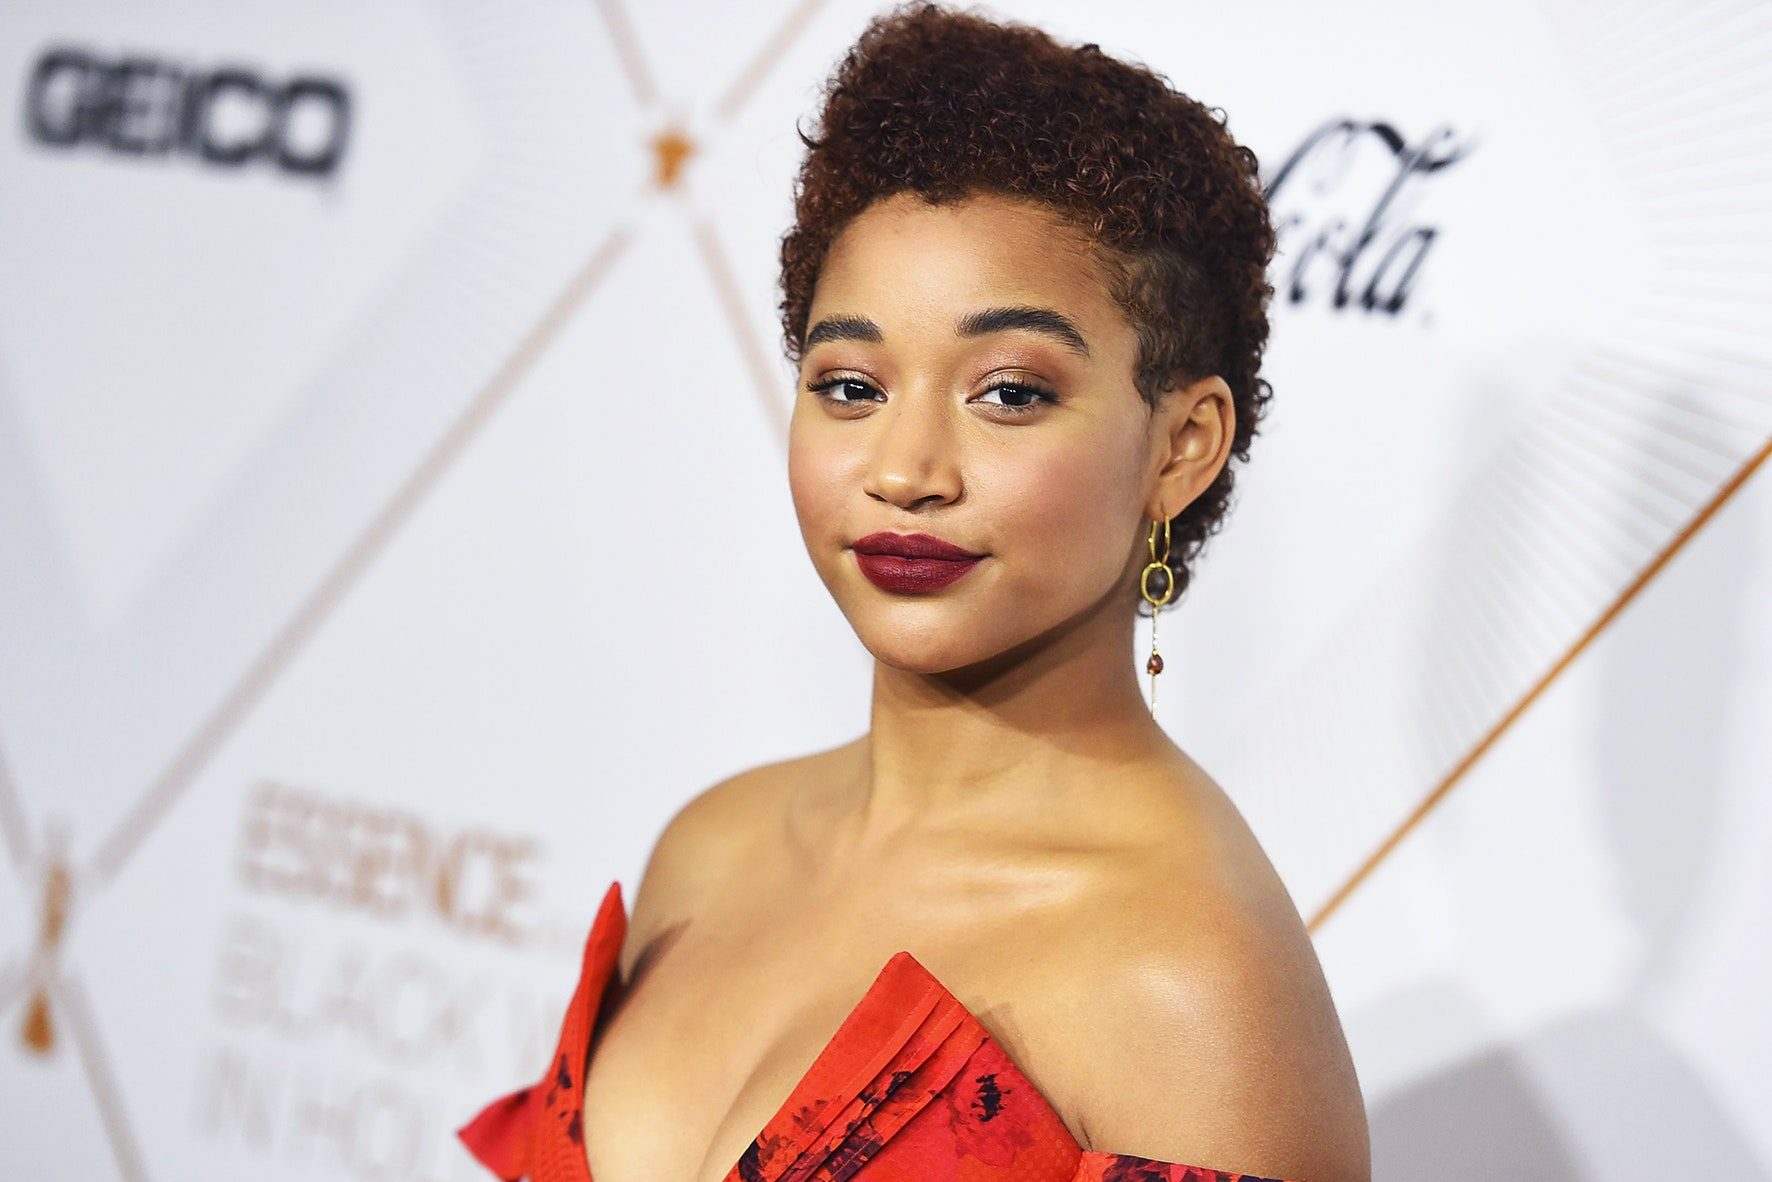 Amandla Stenberg Being Eyed For Lead Role In The Star Wars Disney+ Series THE ACOLYTE